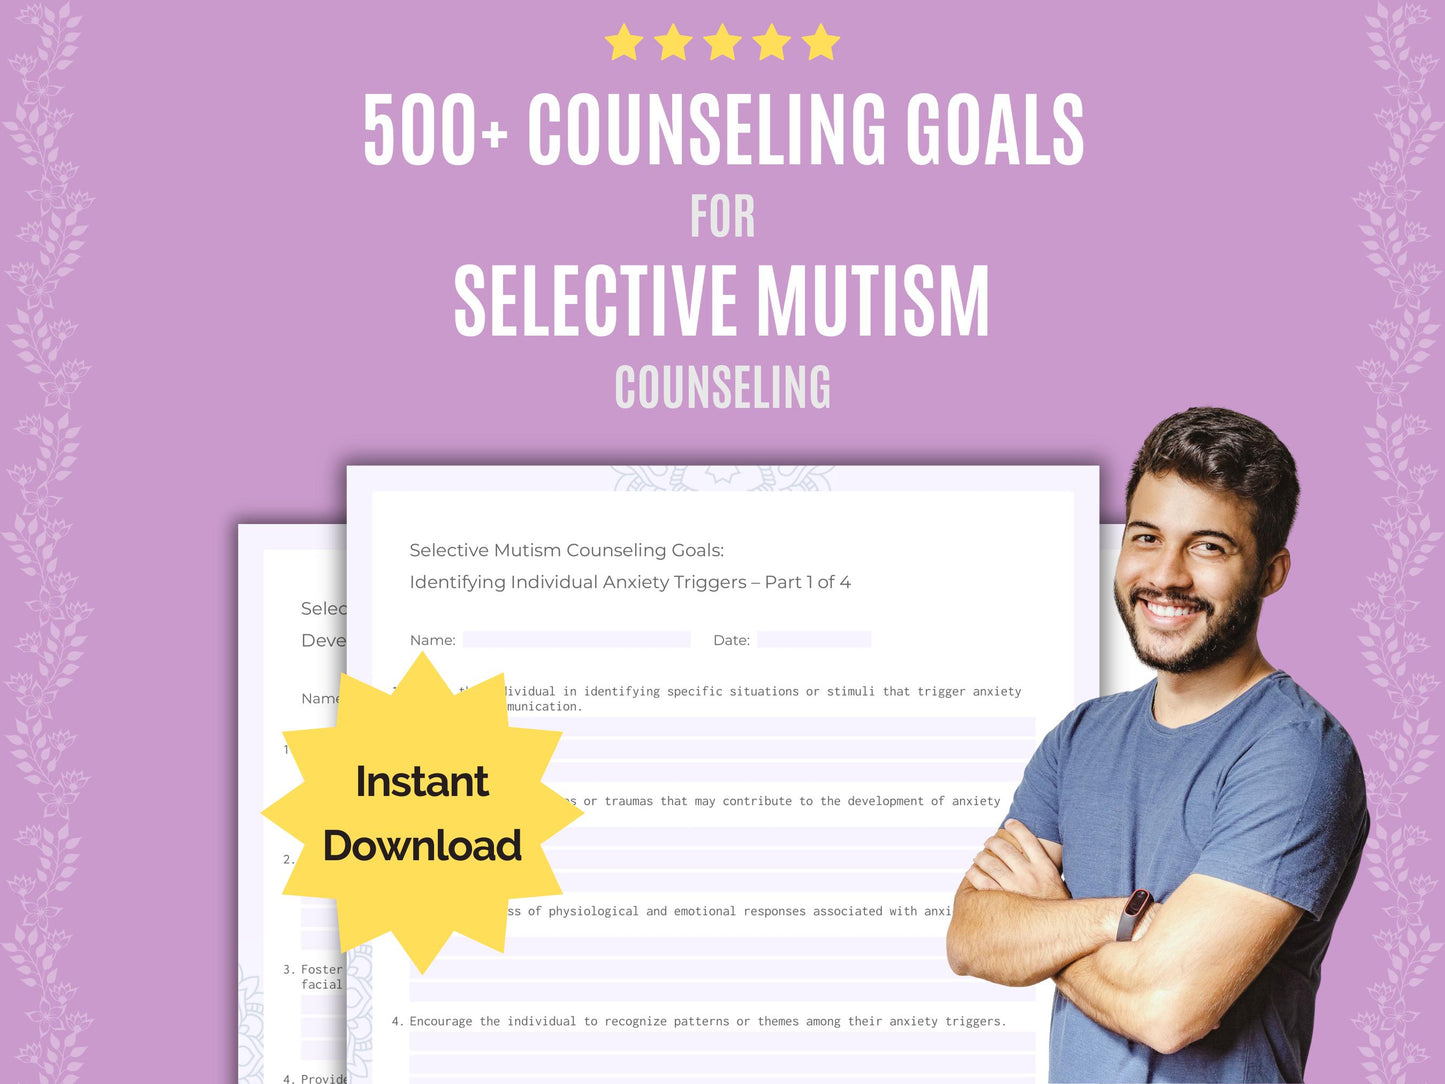 Selective Mutism Counseling Goals